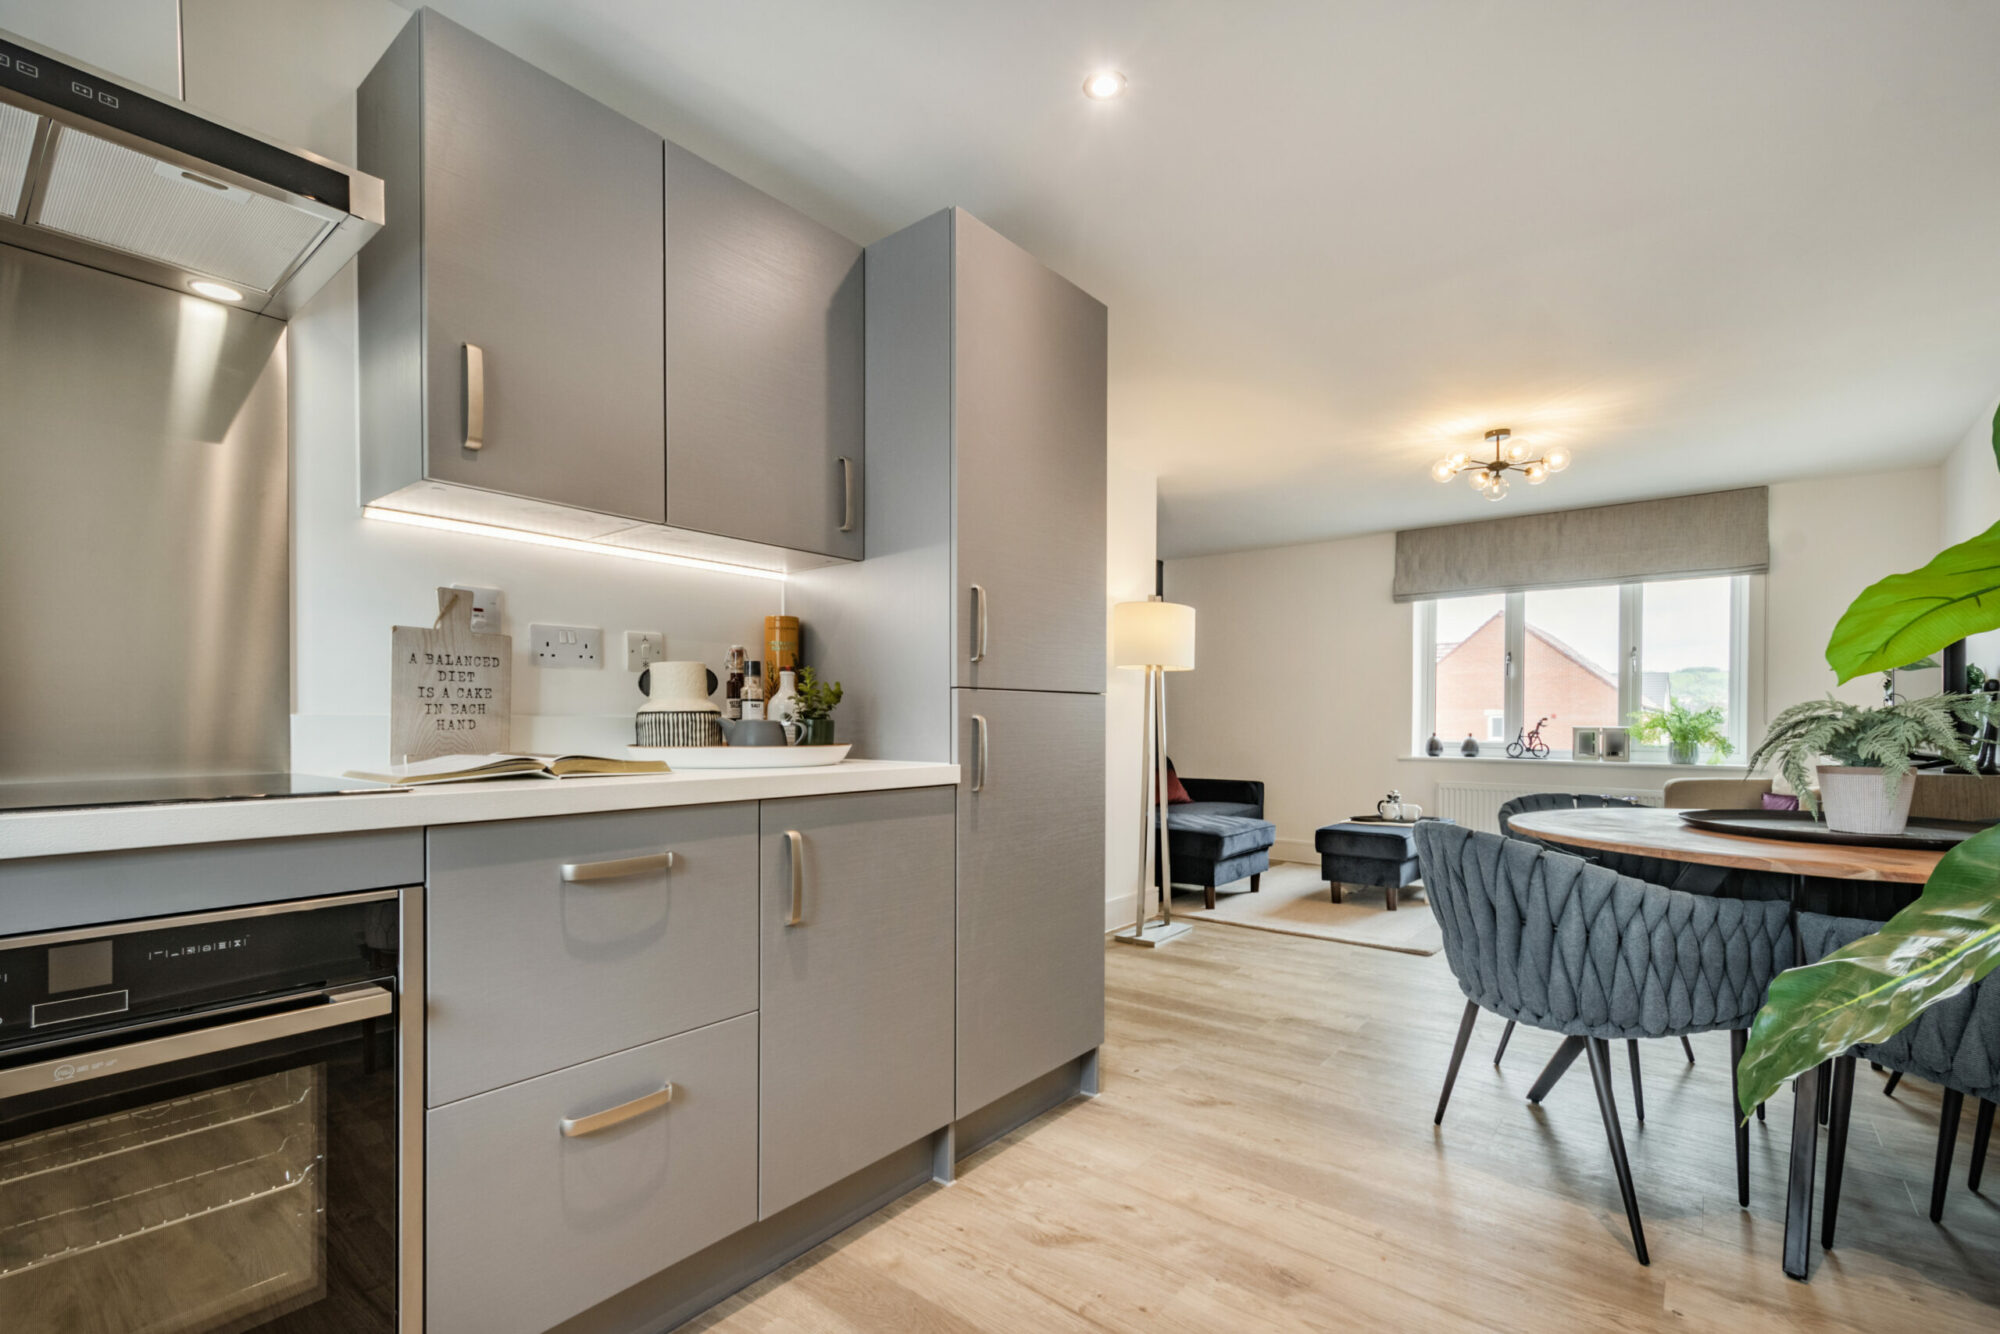 New homes in Westbury - The Osprey show apartment